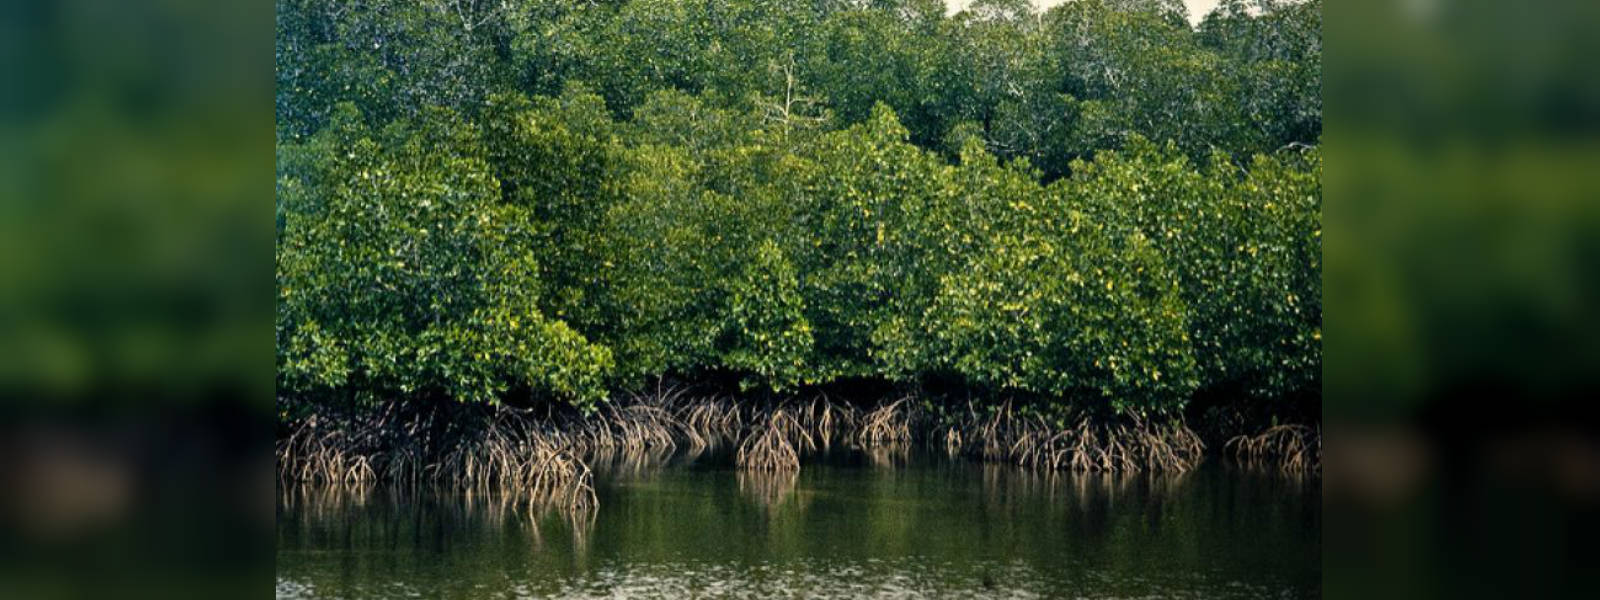 Two mangrove ecosystems in Puttlam declared reserves